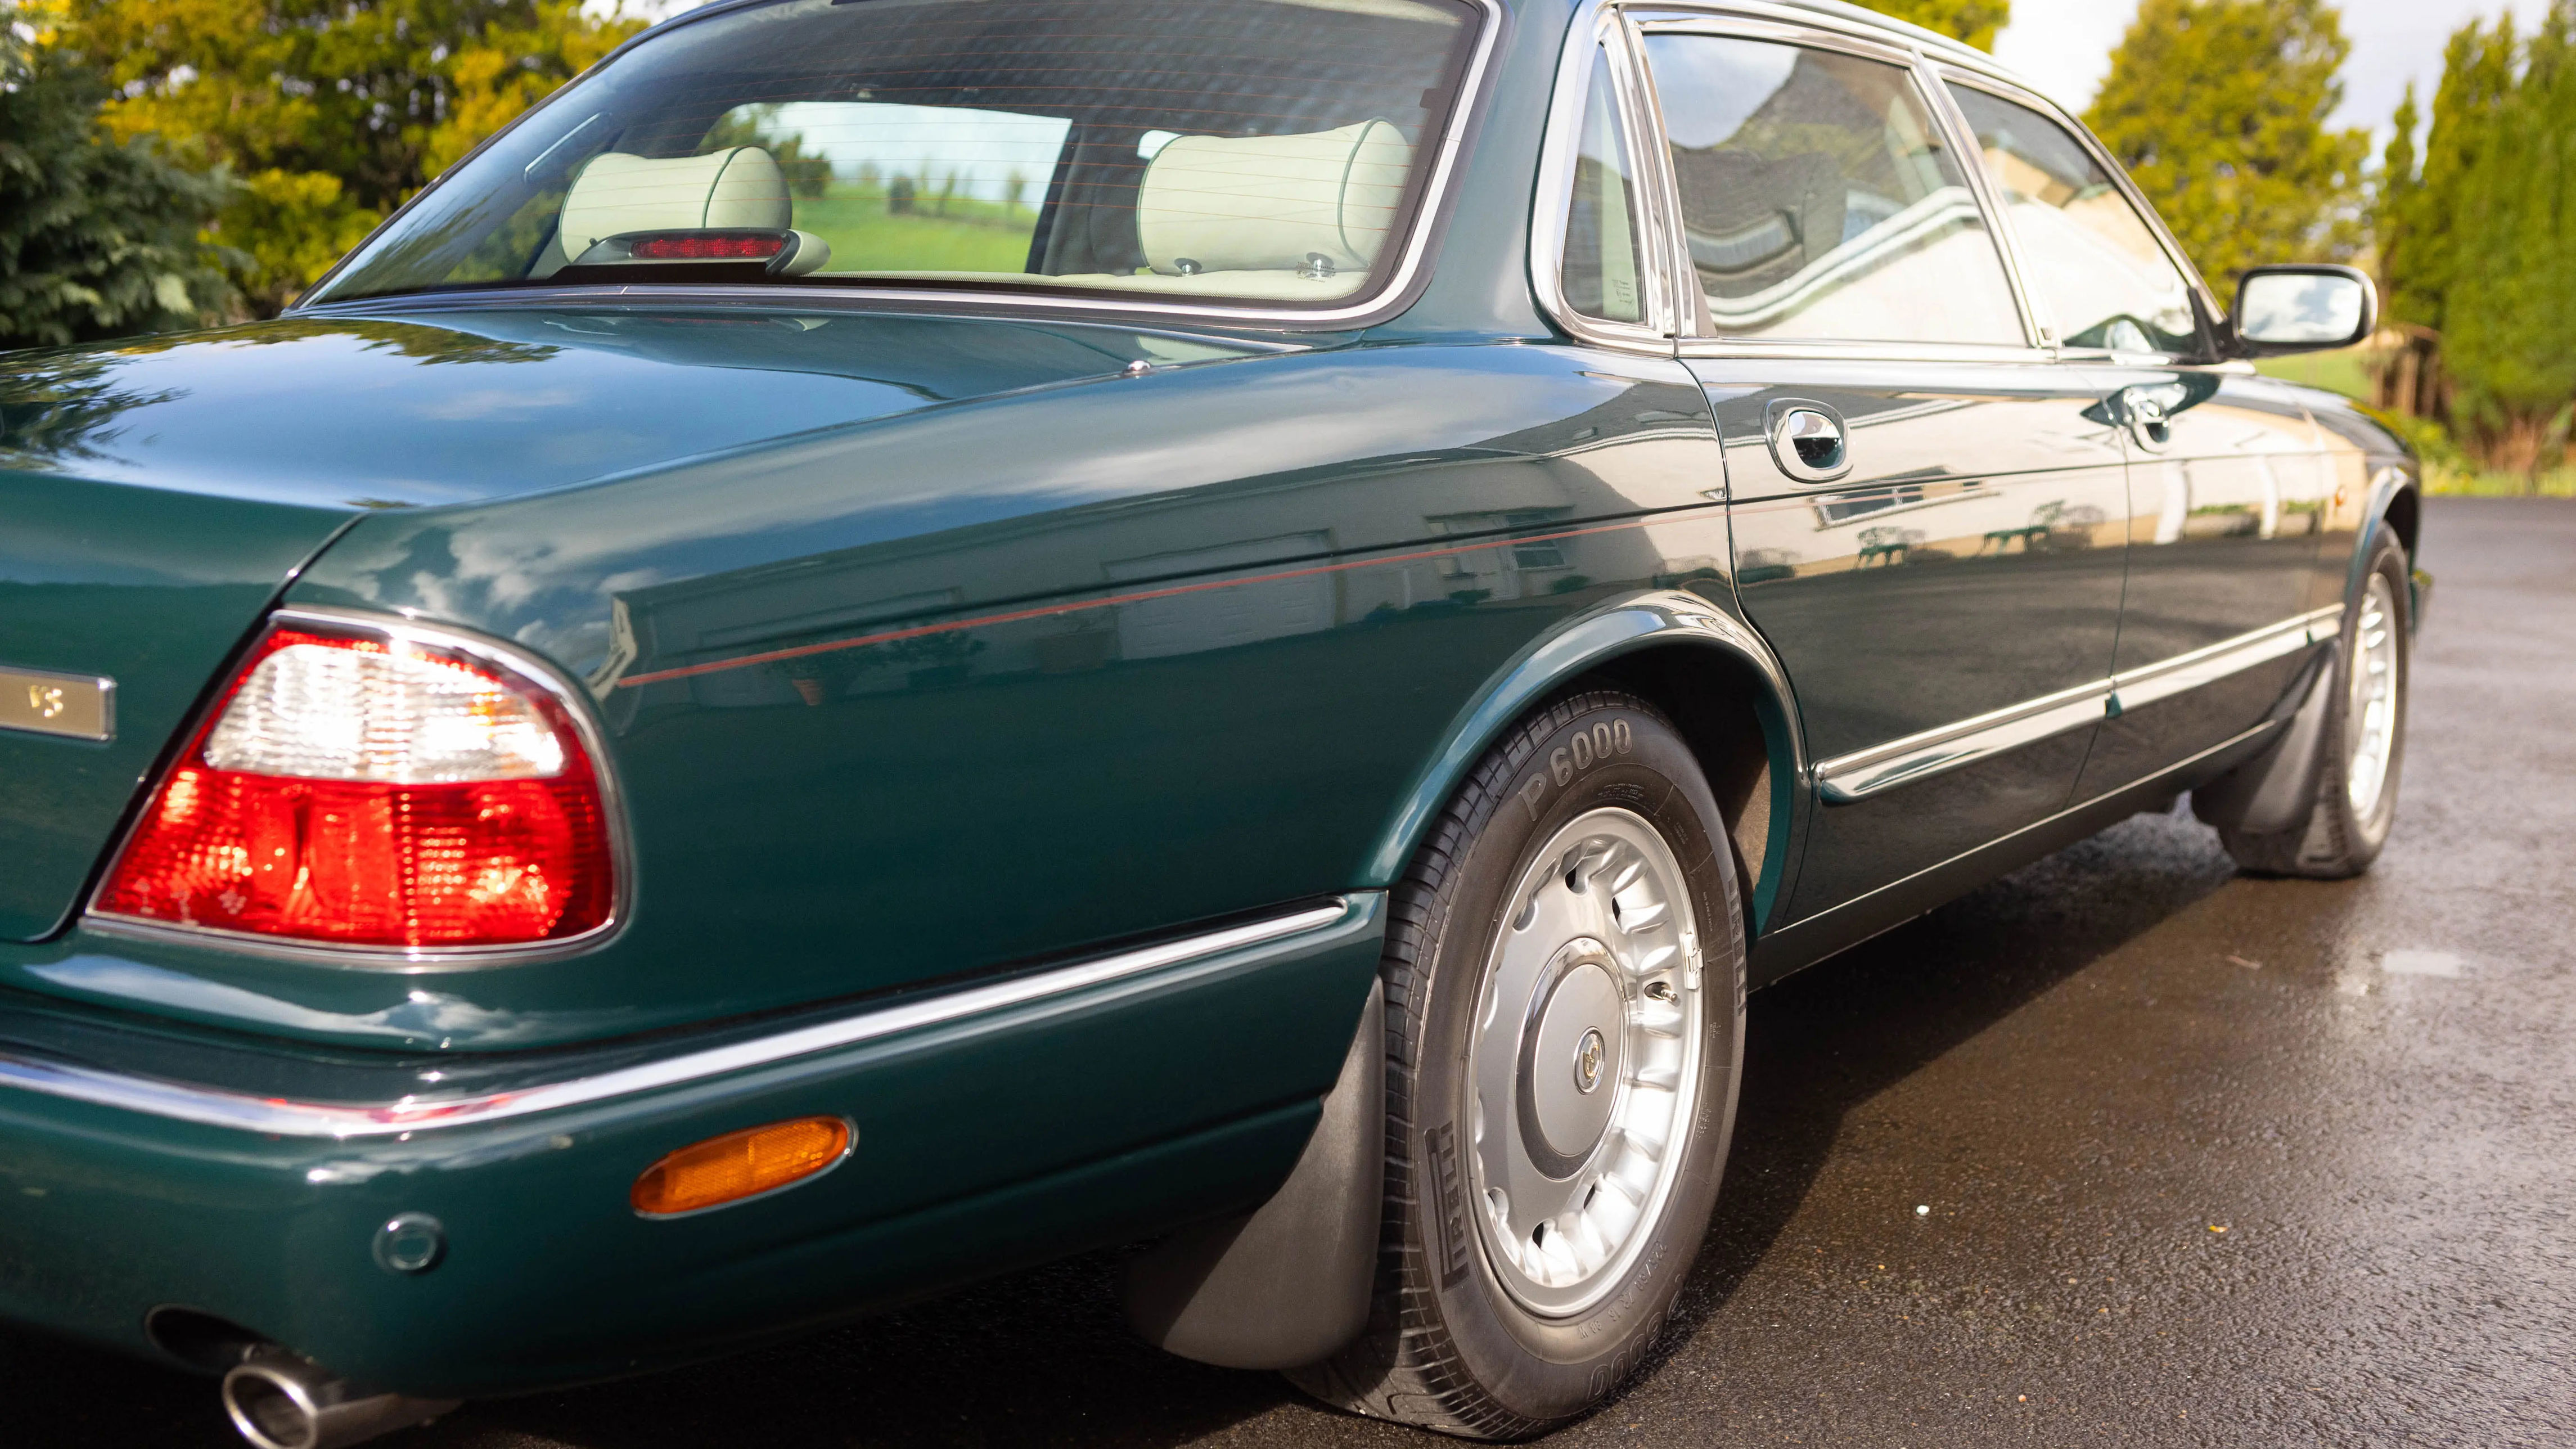 queen elizabeth ii's old 16k-mile daimler majestic is currently up for sale